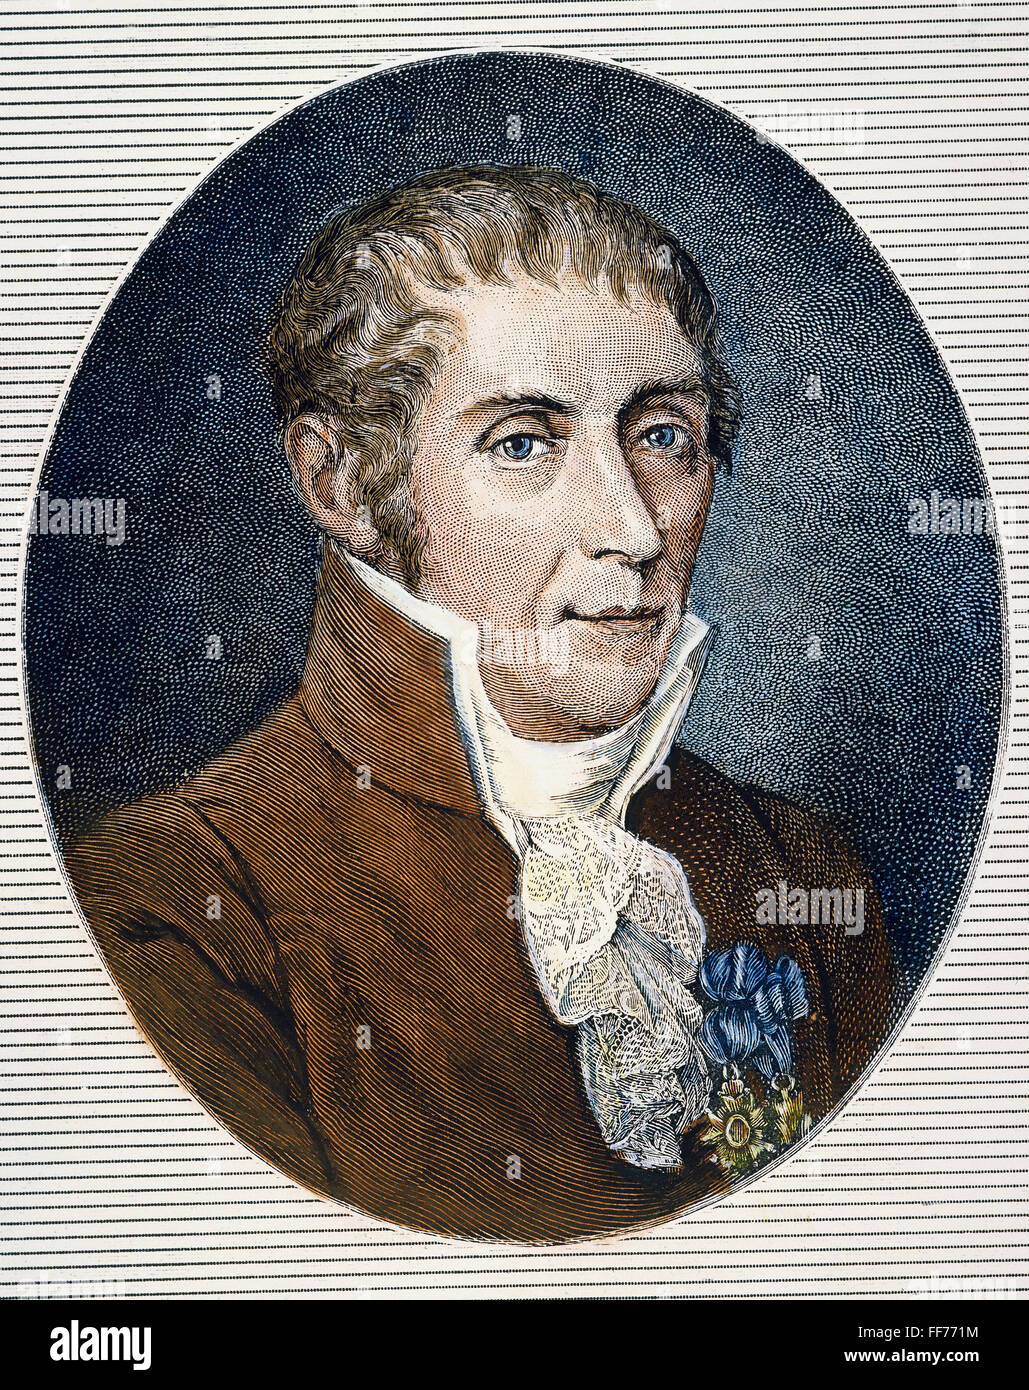 COUNT ALESSANDRO VOLTA /n(1745-1827). Italian physicist. Wood engraving, American, 1892. Stock Photo